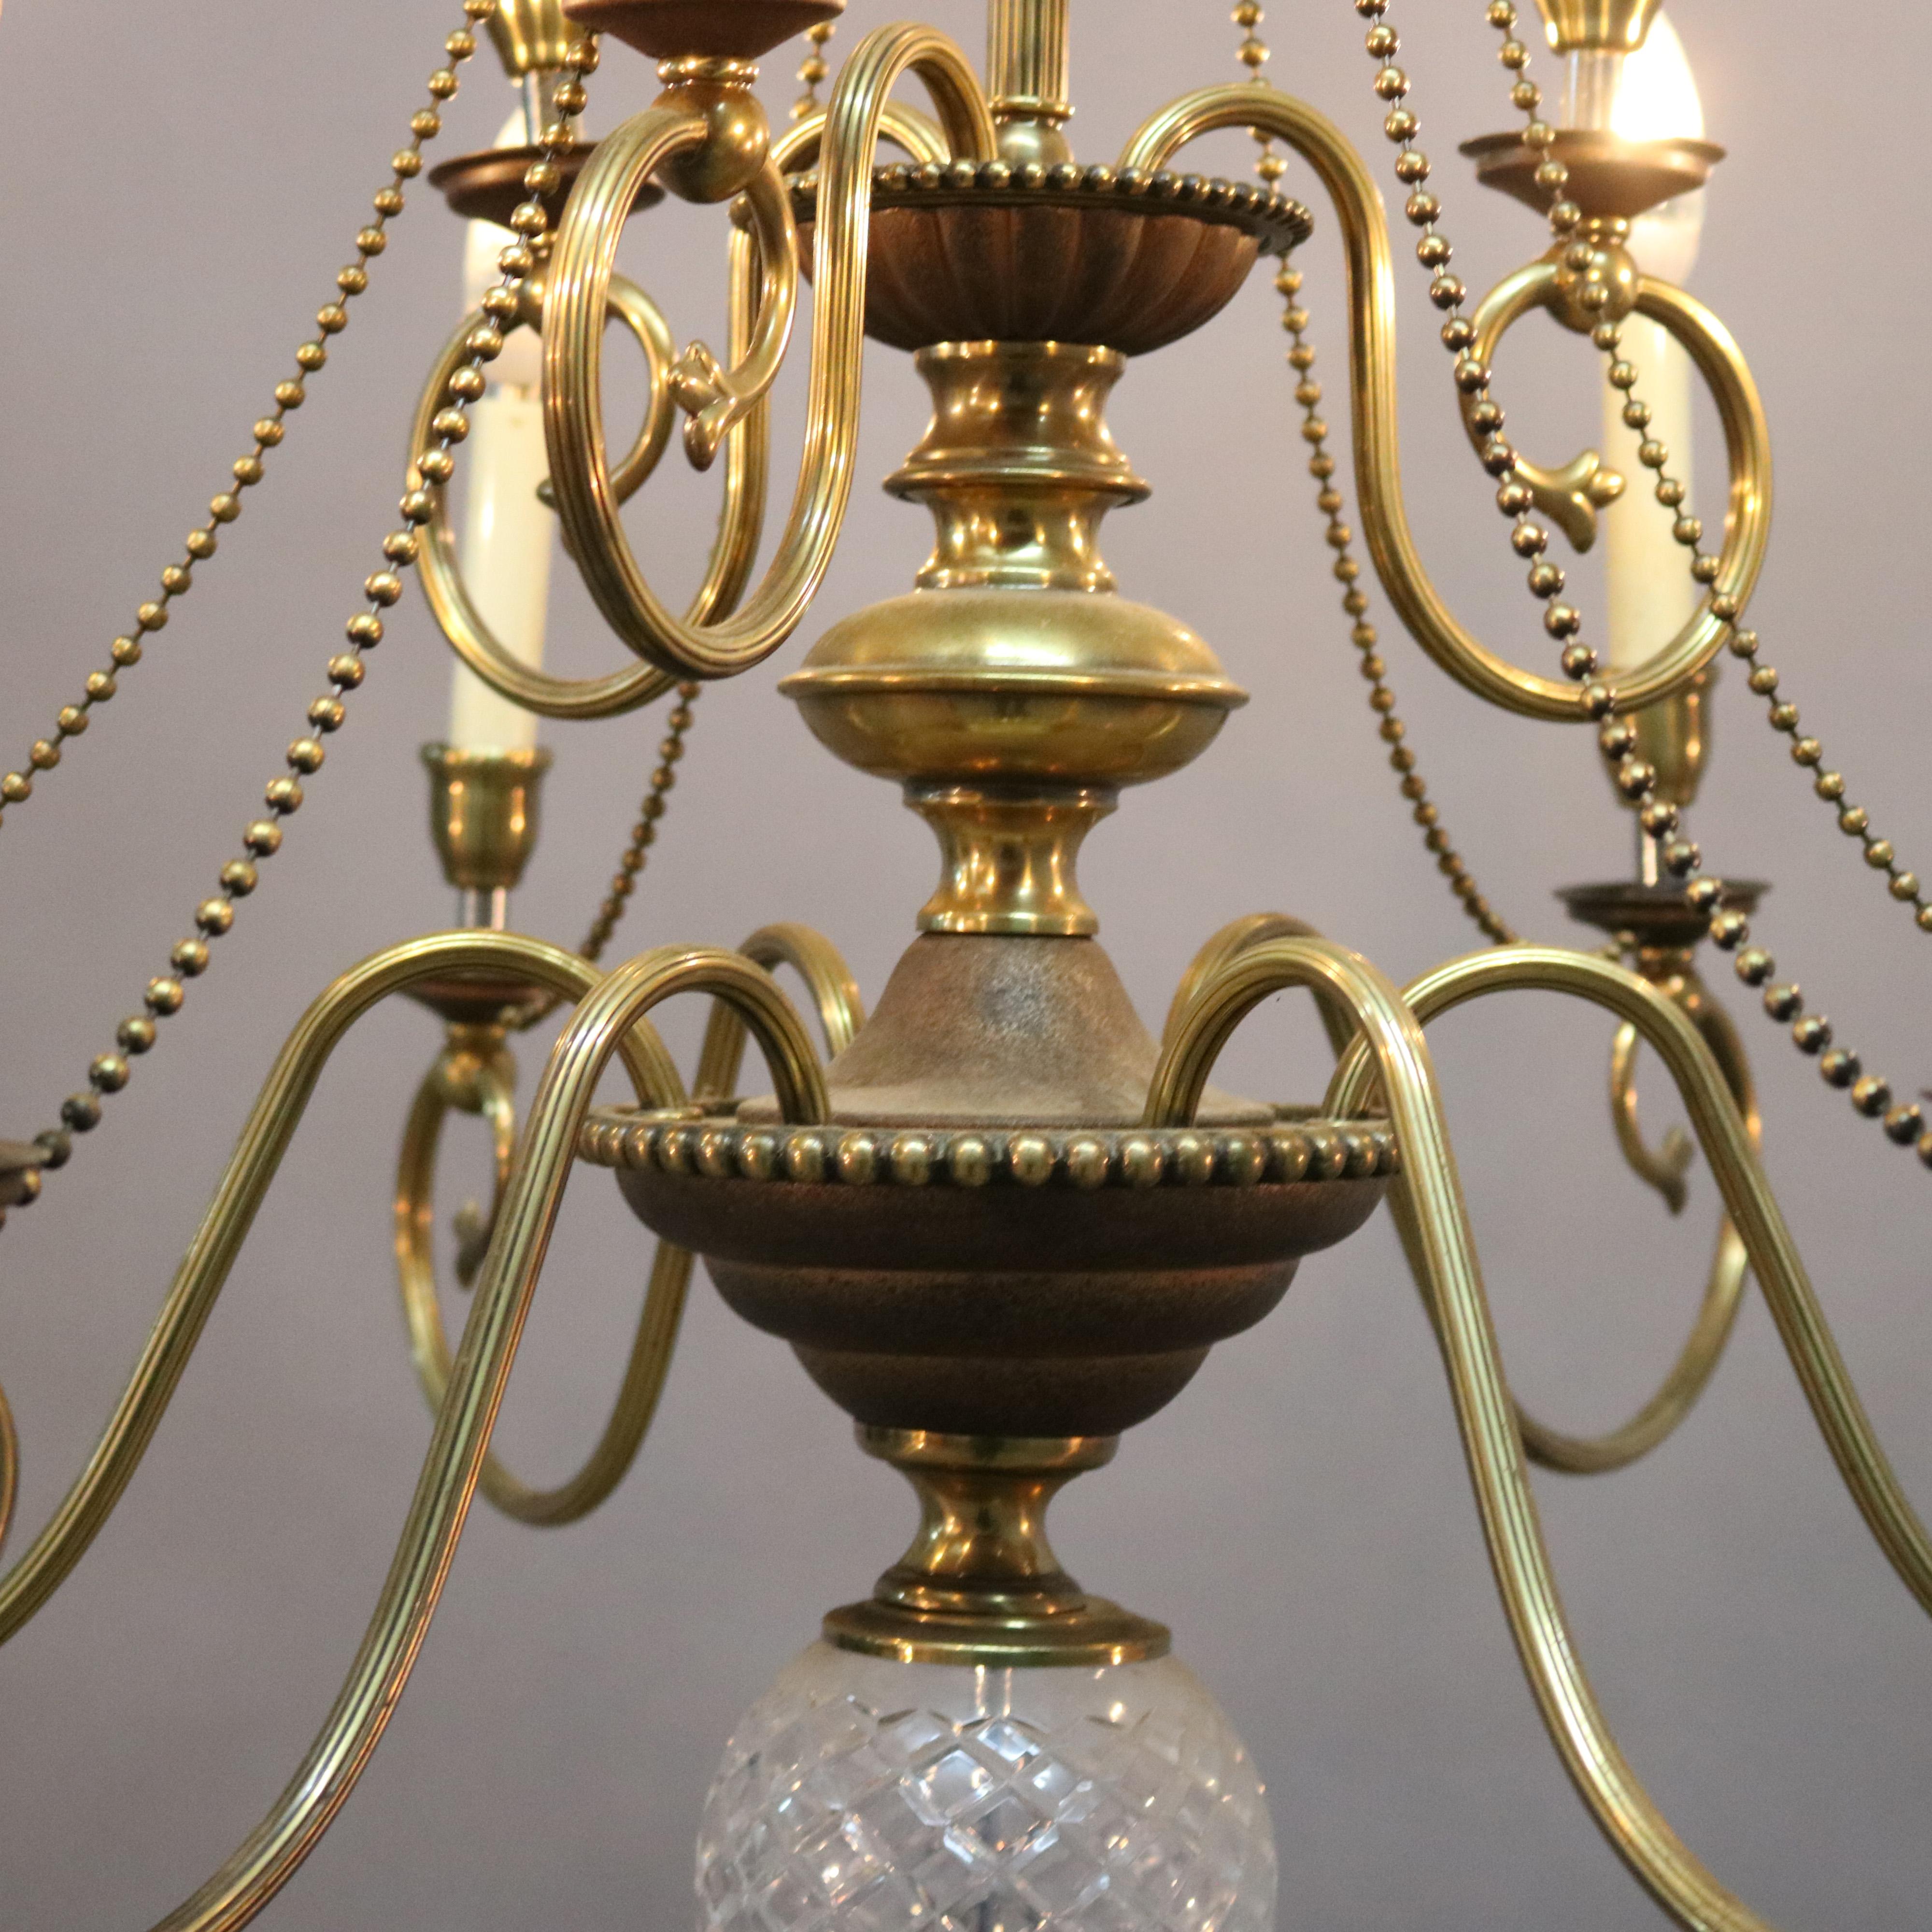 Vintage French Nine-Light Tiered Brass and Crystal Chandelier, 20th Century For Sale 1